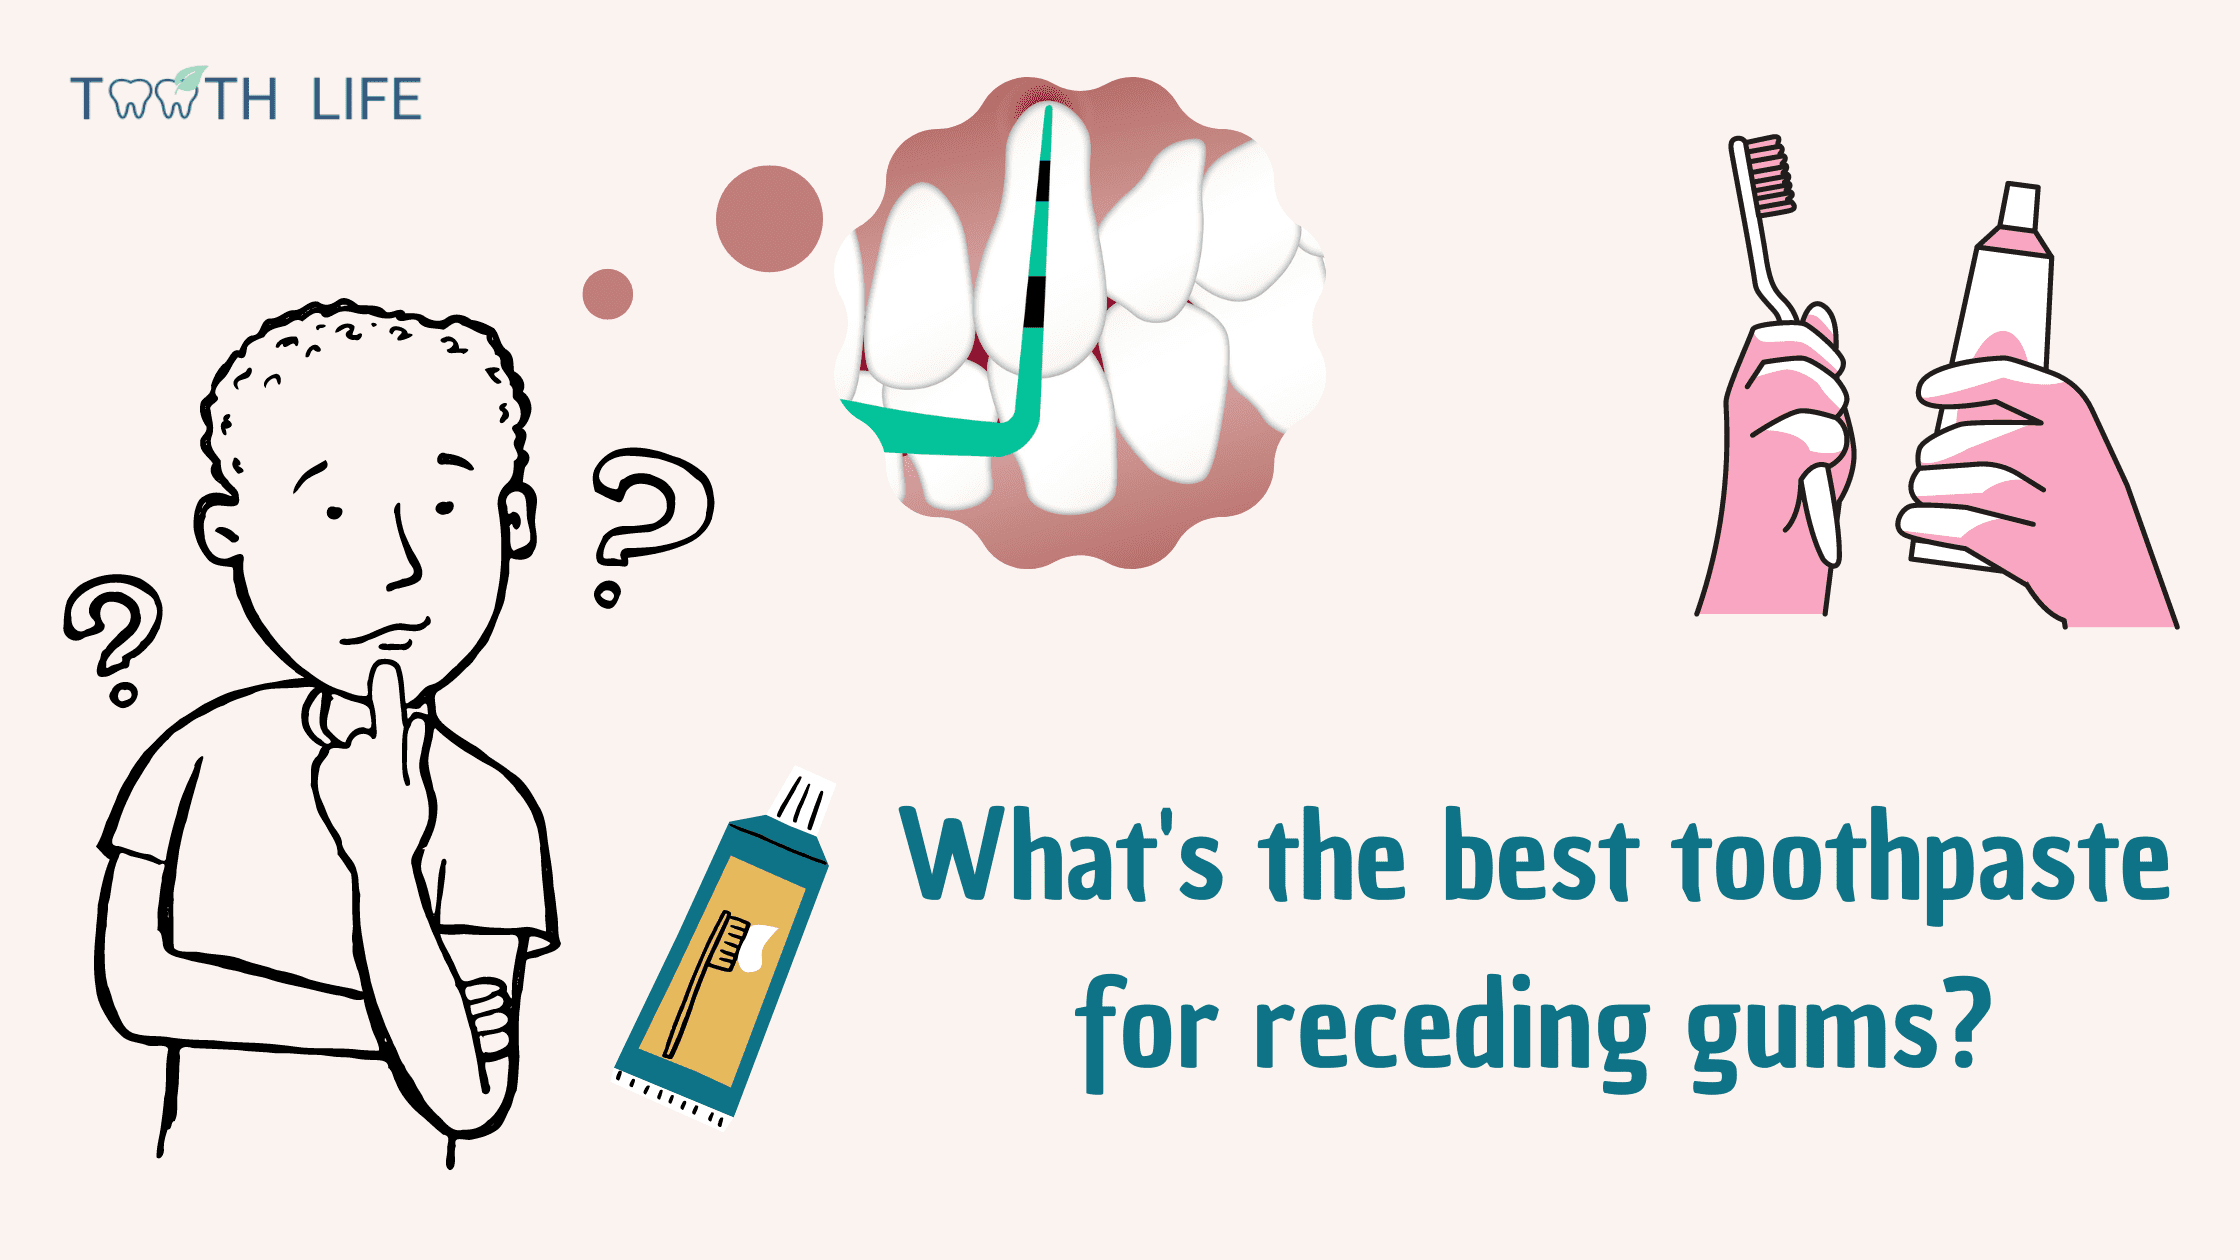 Best toothpastes for receding gums